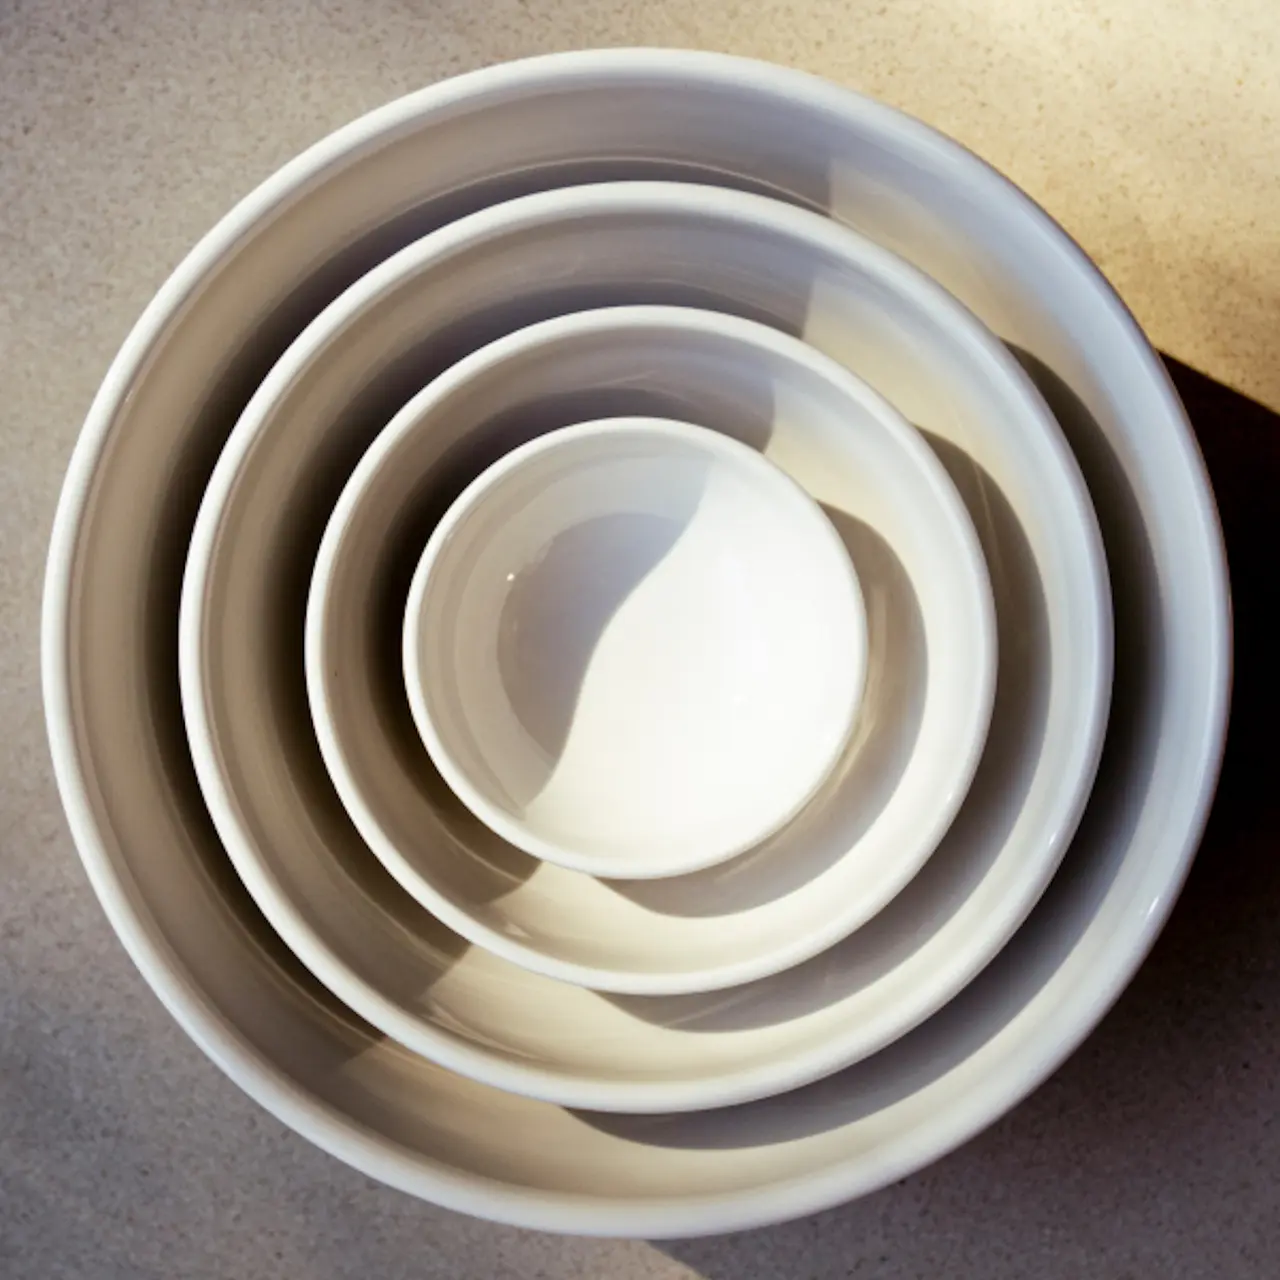 A top-down view of a set of nested white mixing bowls on a surface, creating a gradation of sizes from large to small.